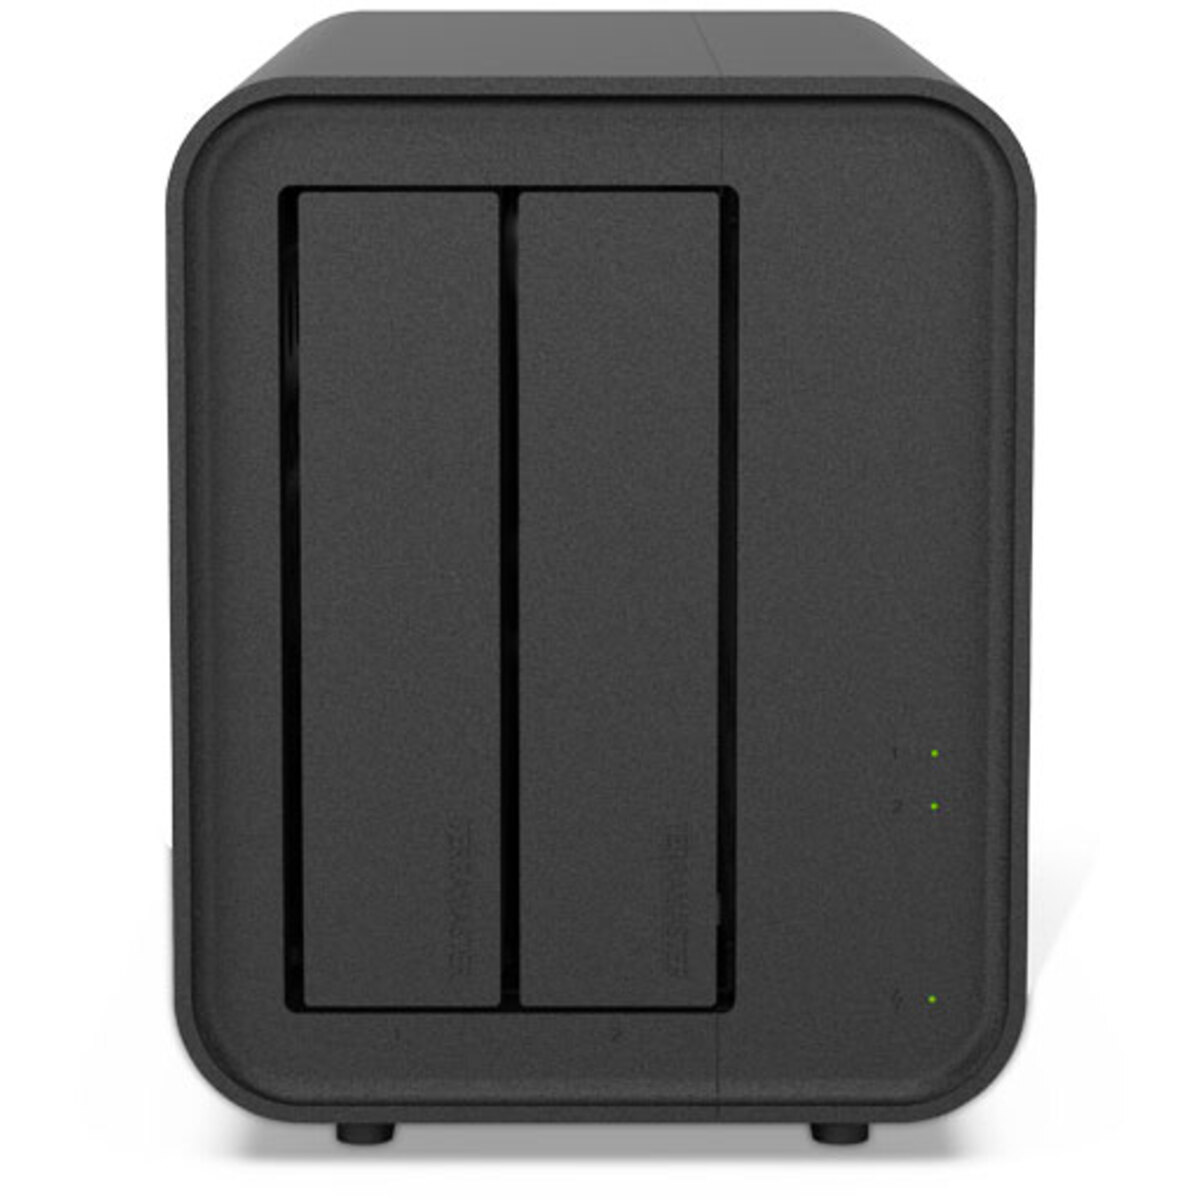 TerraMaster F2-424 28tb 2-Bay Desktop Multimedia / Power User / Business NAS - Network Attached Storage Device 2x14tb Seagate IronWolf Pro ST14000NT001 3.5 7200rpm SATA 6Gb/s HDD NAS Class Drives Installed - Burn-In Tested F2-424